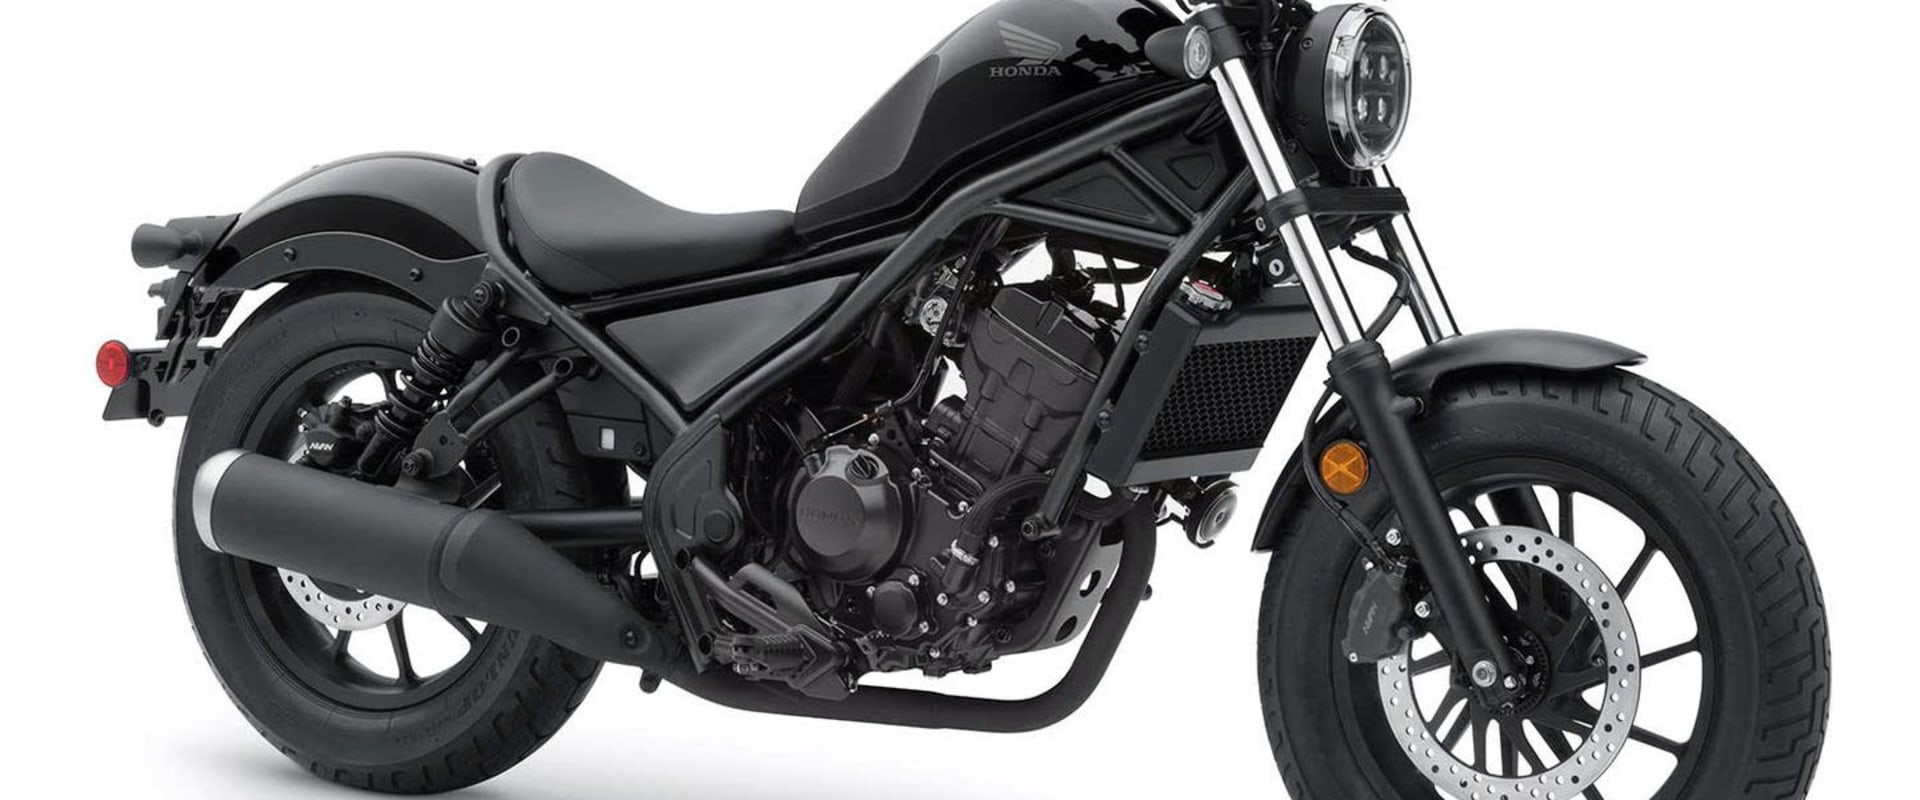 Comparing Budget Motorcycles: What to Consider Before You Buy